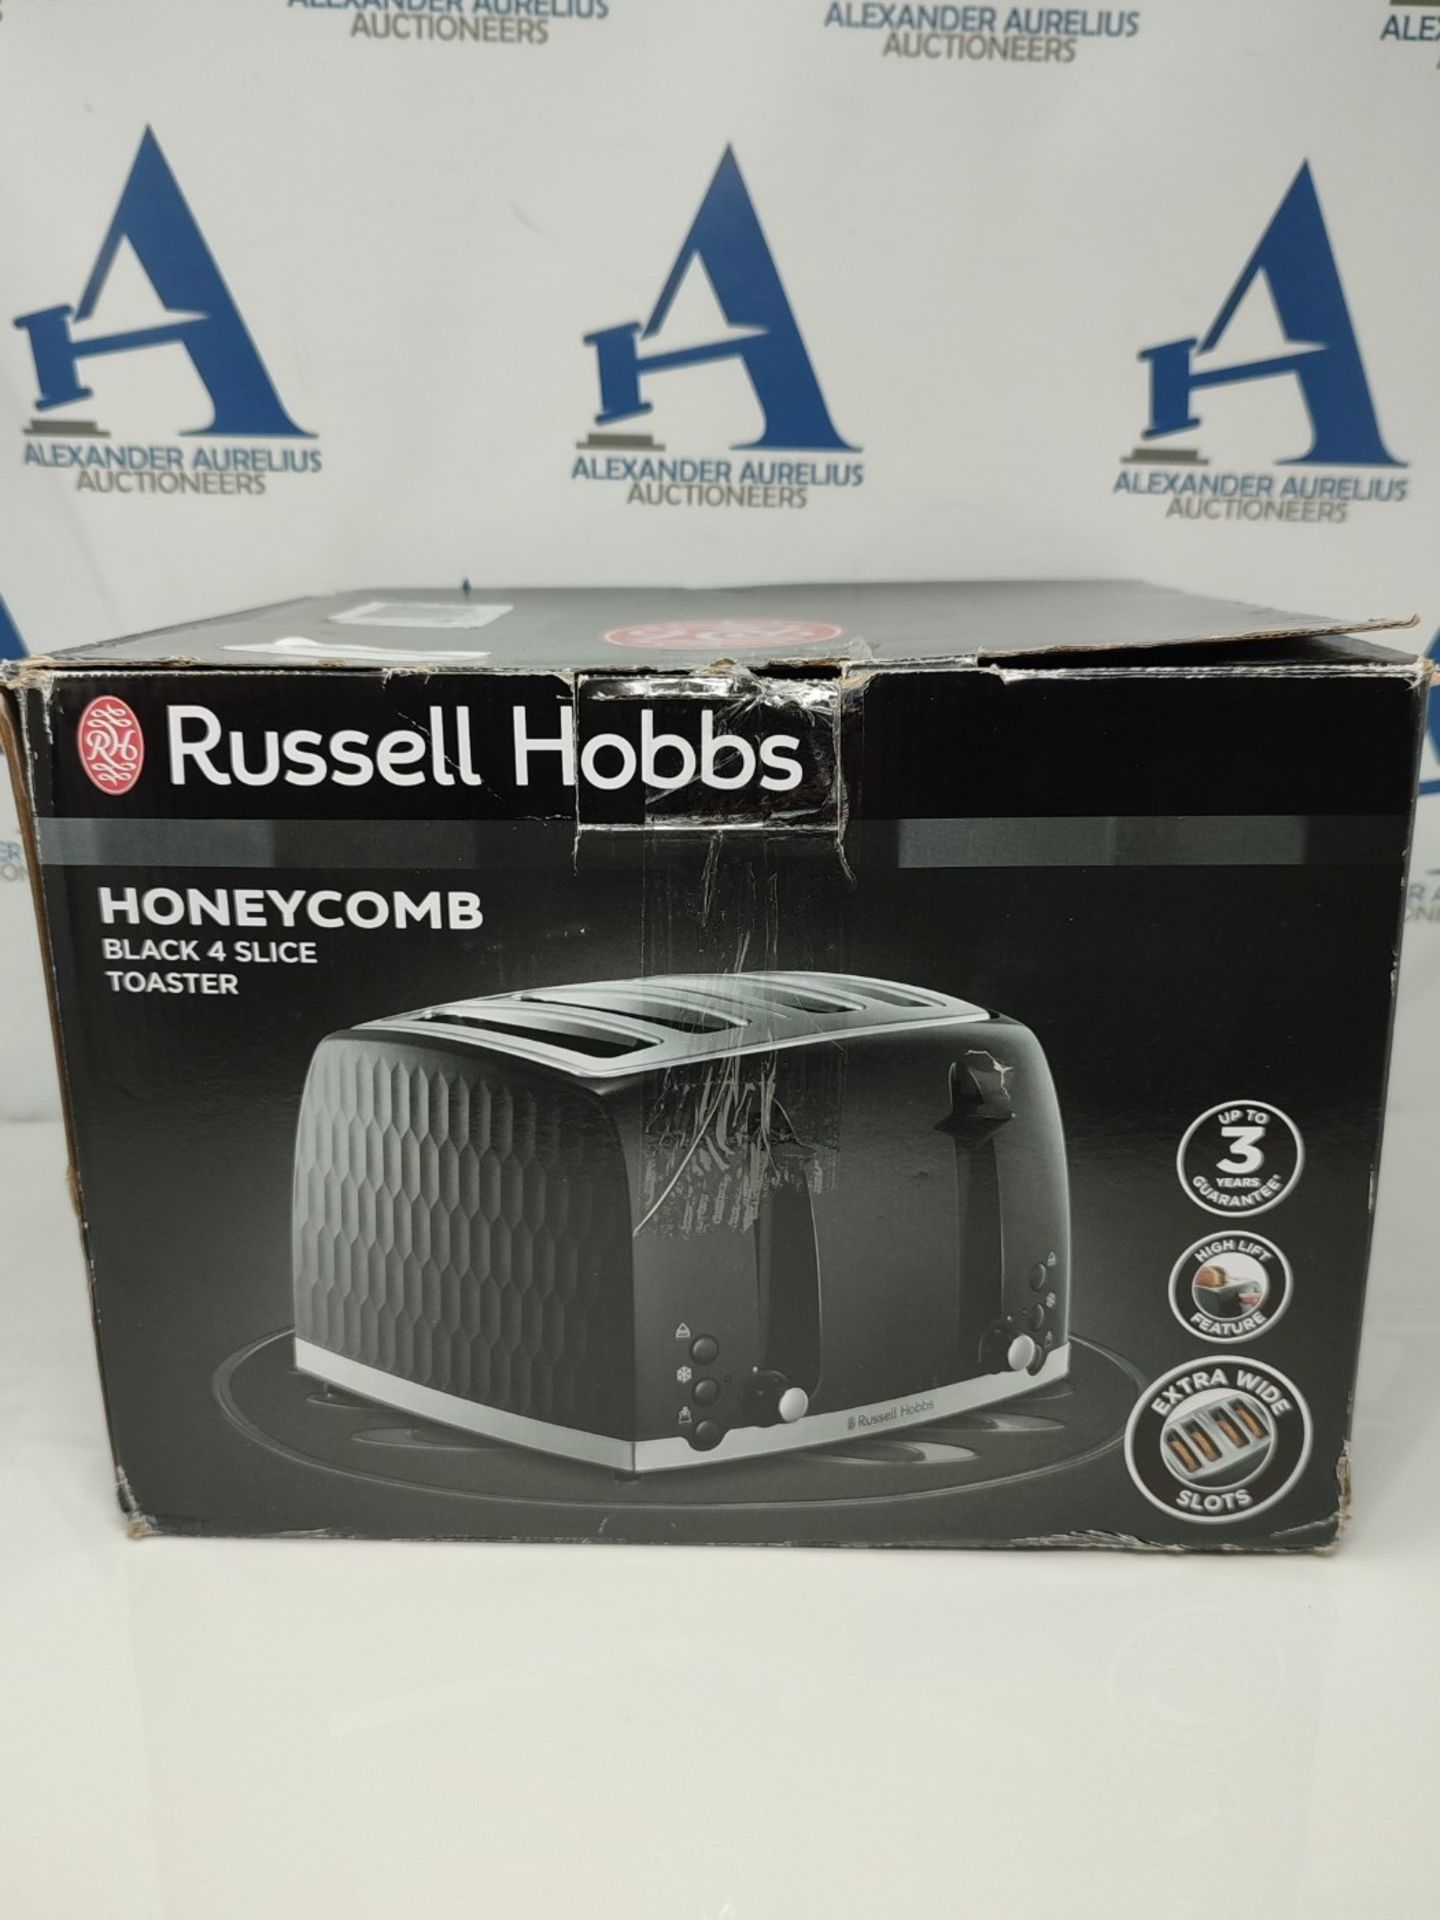 Russell Hobbs 26071 4 Slice Toaster - Contemporary Honeycomb Design with Extra Wide Sl - Image 2 of 3